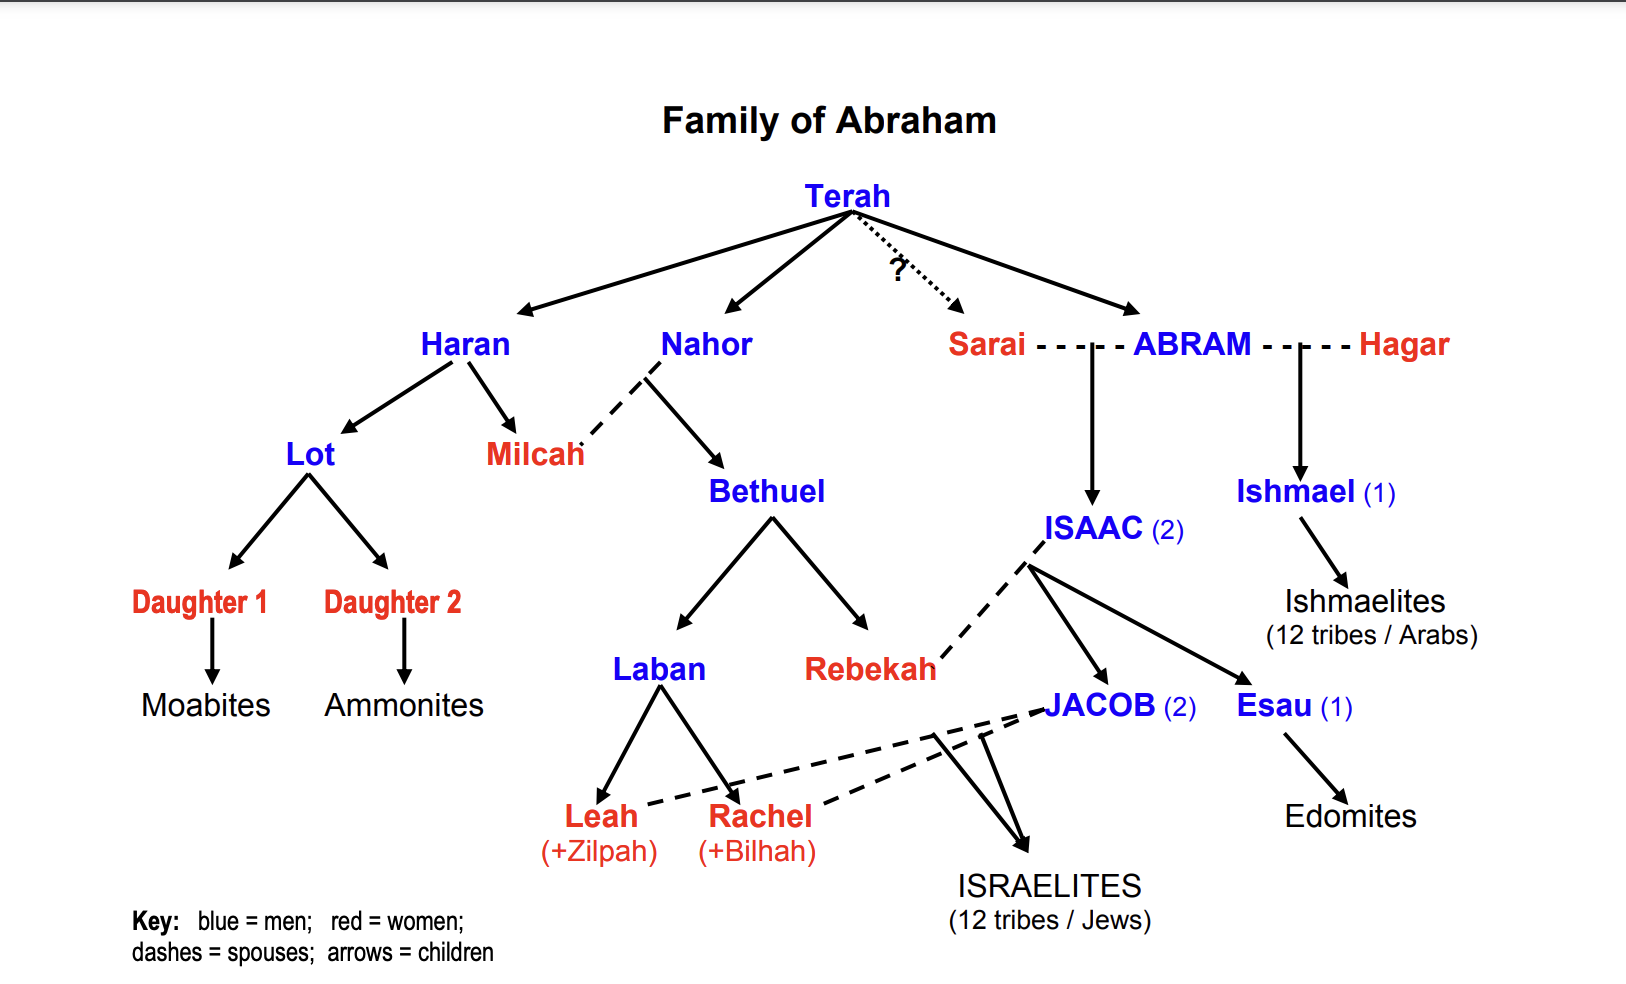 The Tribes of Israel